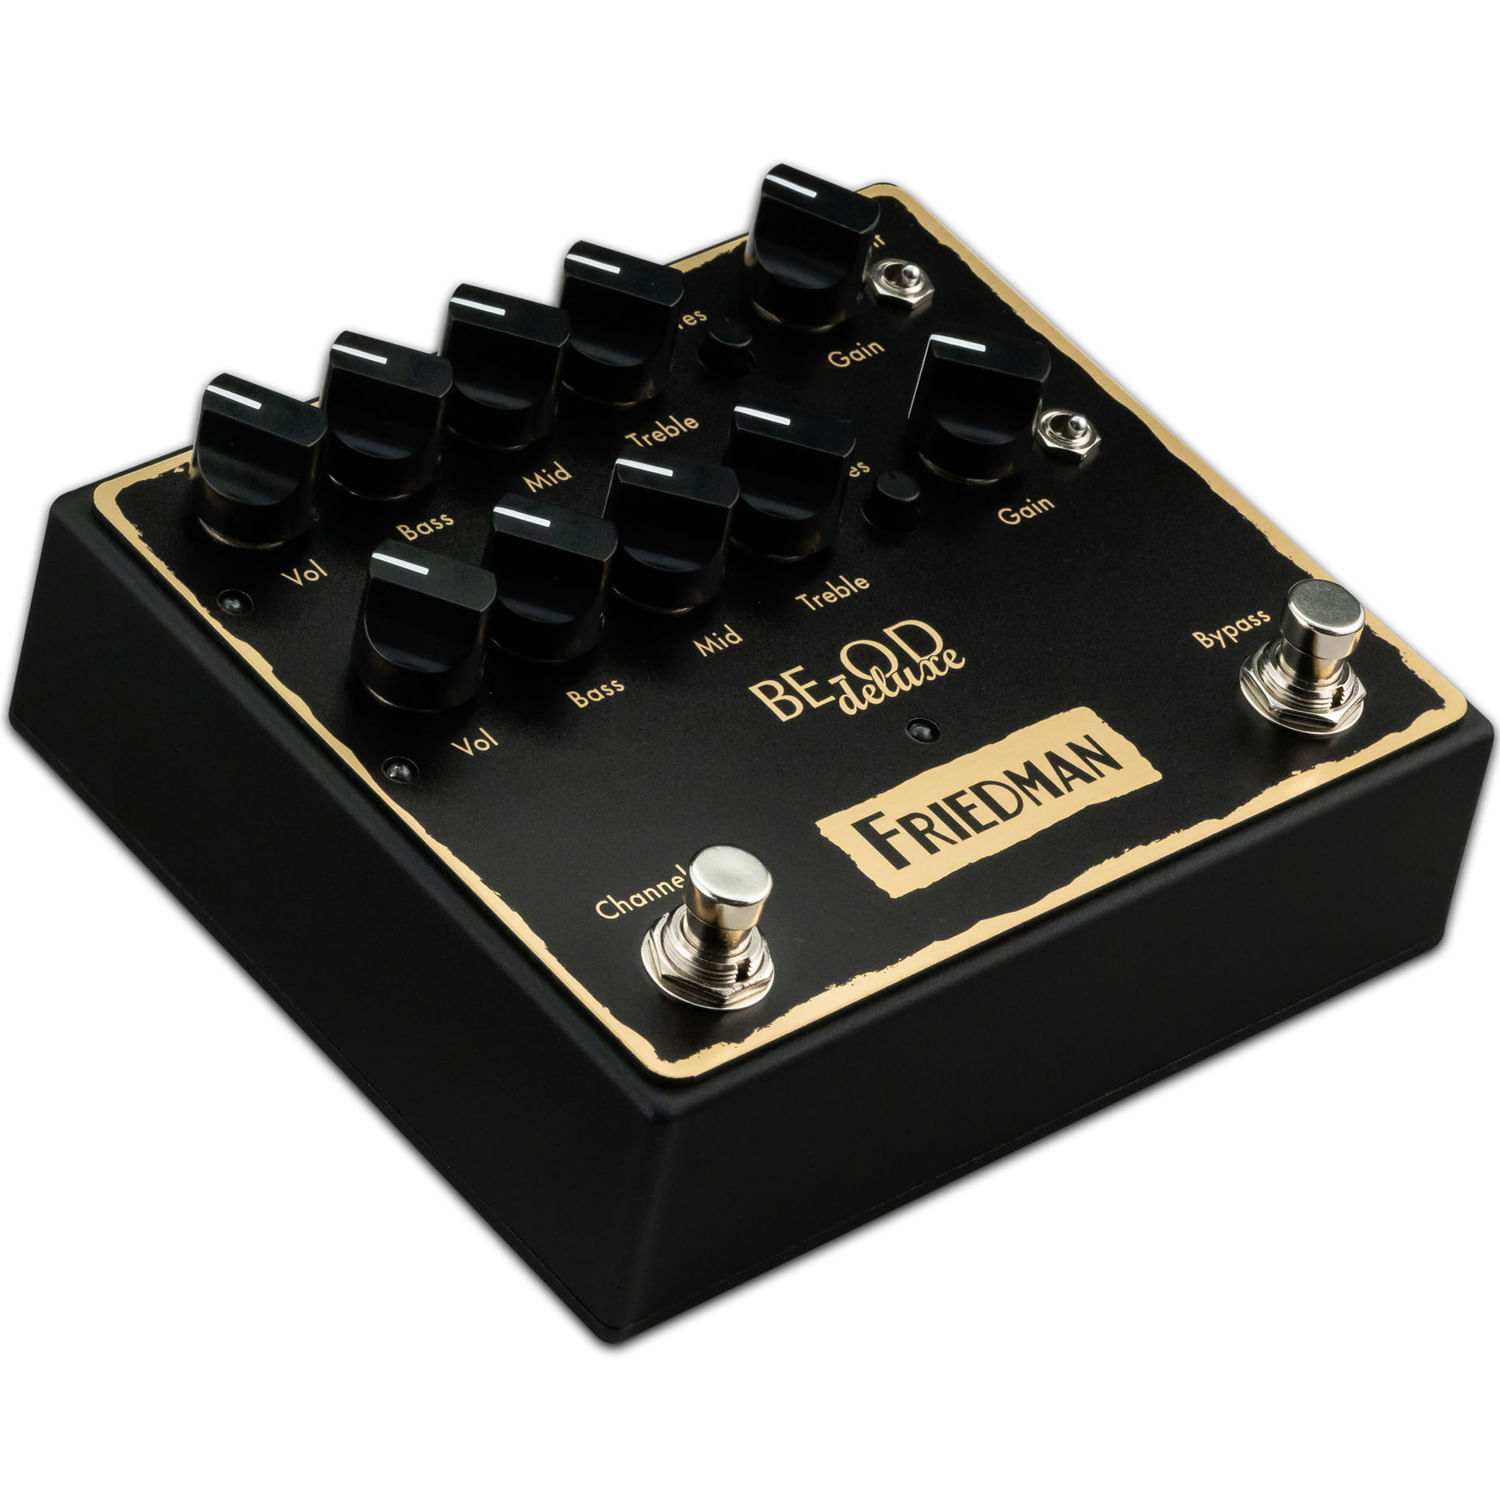 Friedman BE-OD Deluxe Overdrive Pedal